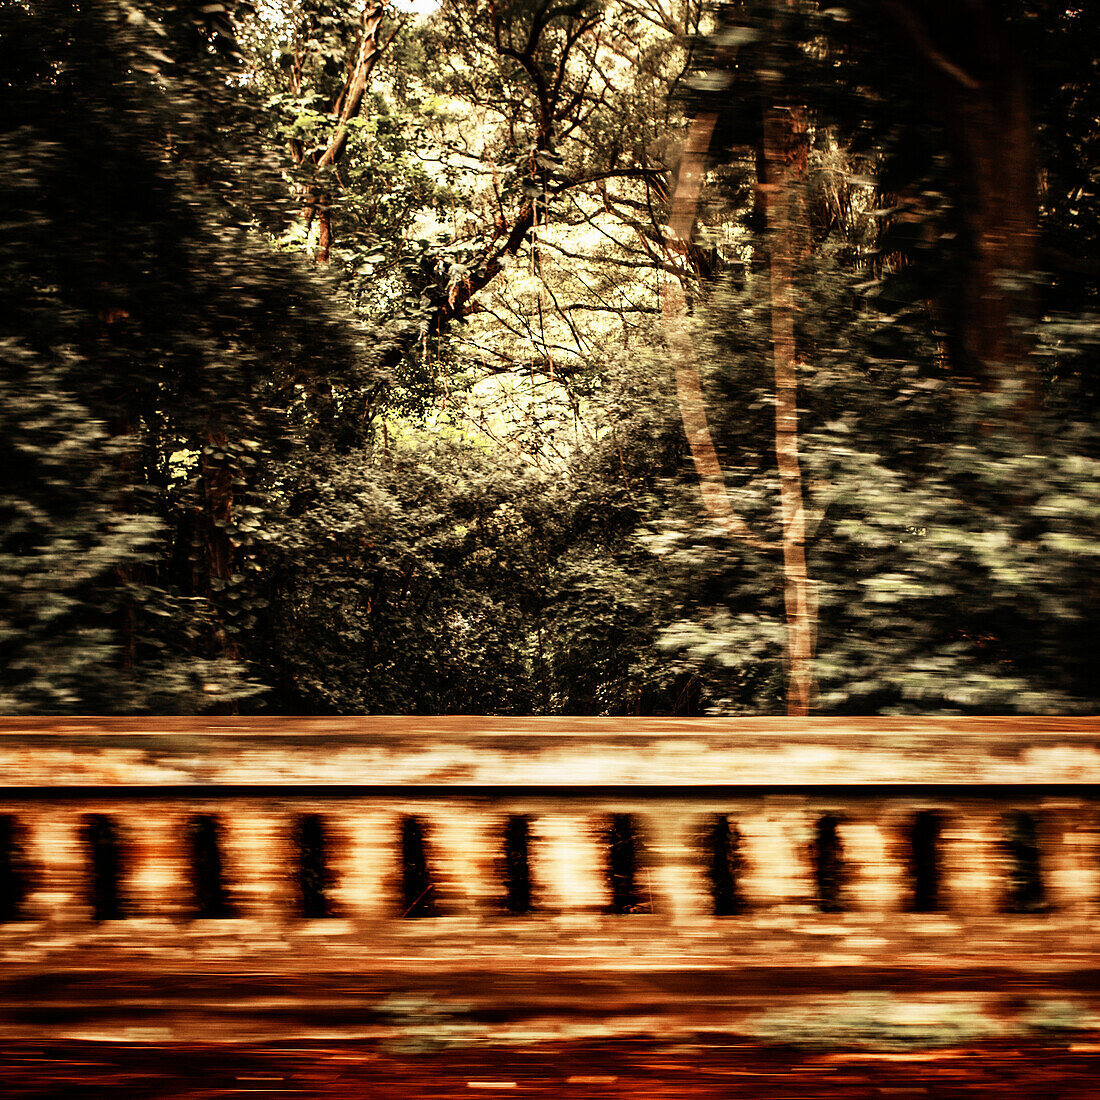 Bridge barrier and foliage with motion blur.